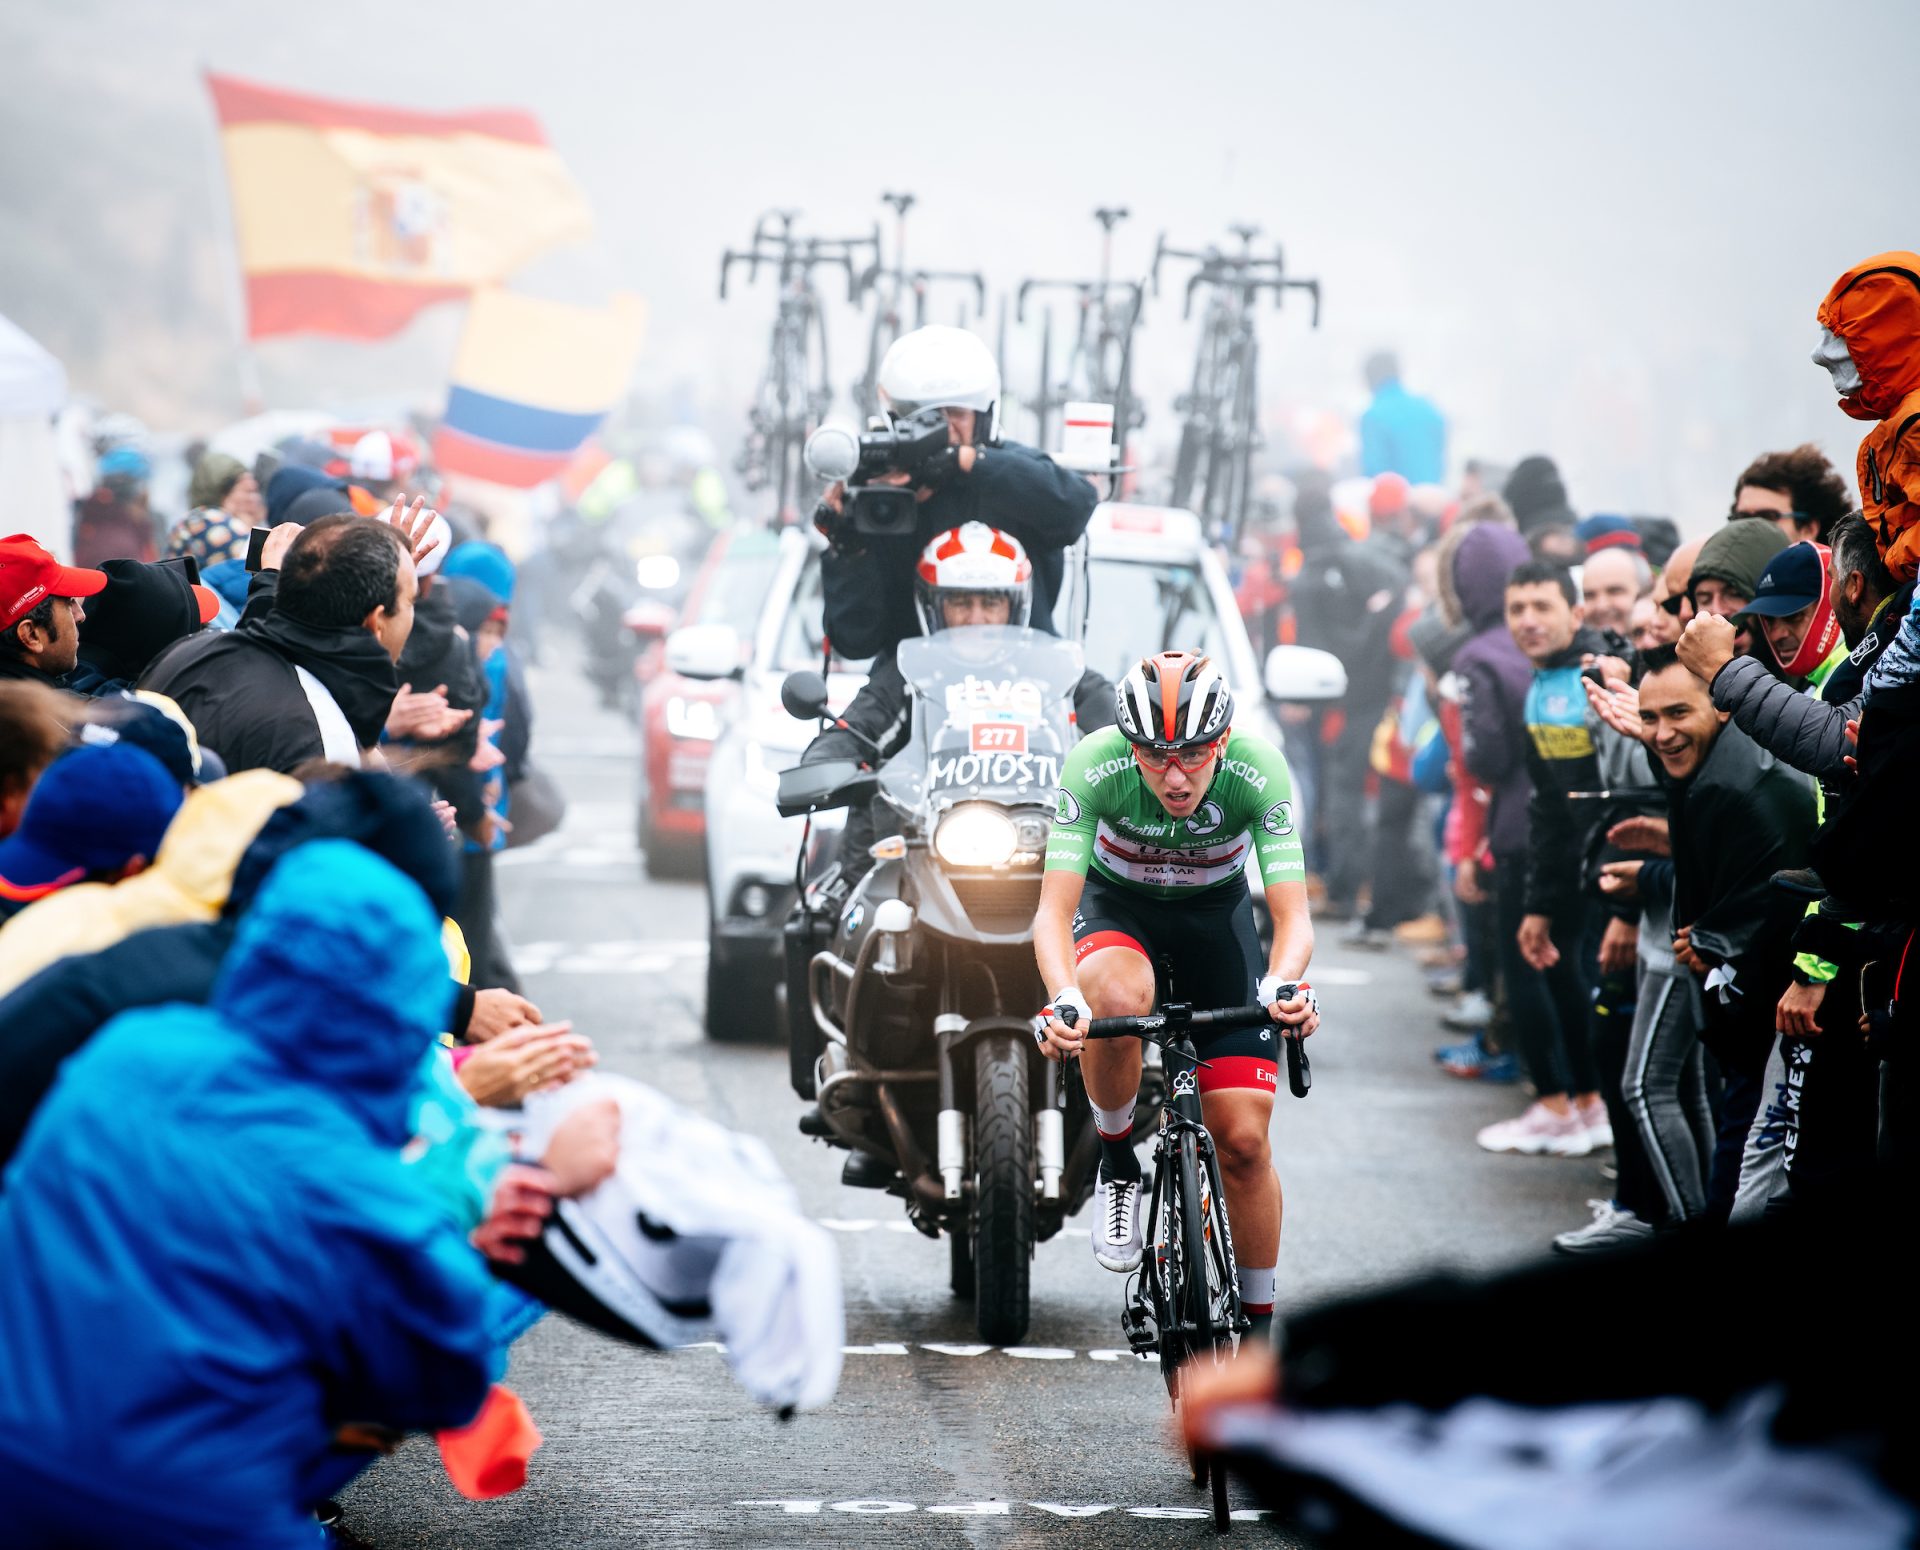 Tadej Pogačar races to the win on stage 20 of the 2019 Vuelta a España on Plataforma de Gredos. He's alone, dressed in the green jersey of the race's best young rider. Fans crowd in on all sides and a TV moto and team car trail him. The road is shrouded in mist and rain, and the fans are dressed in rain gear as flags whip straight out in the wind.